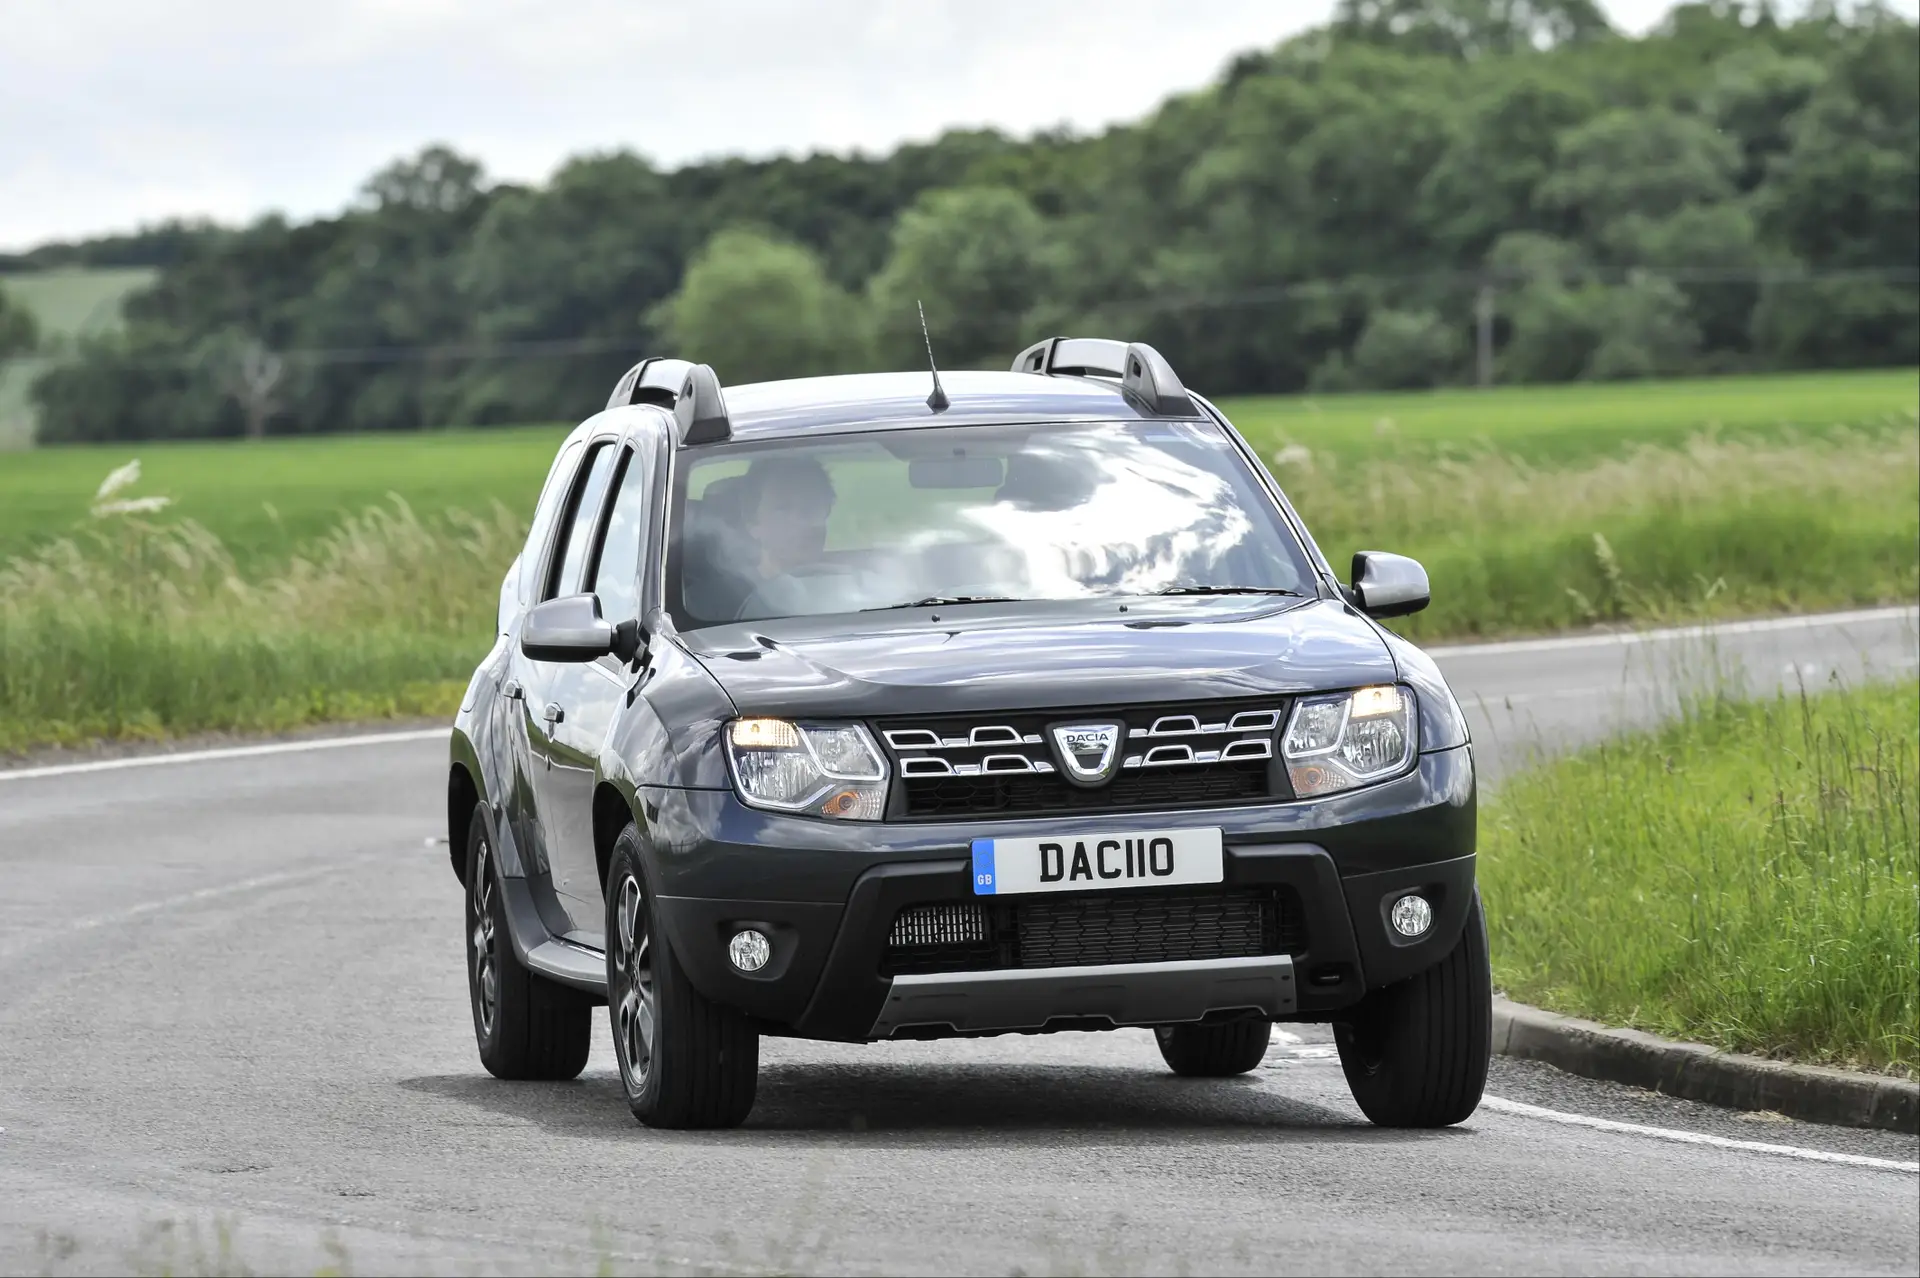 Used Dacia Duster (2012-2018) Review: exterior front three quarter photo of the Dacia Duster on the road 